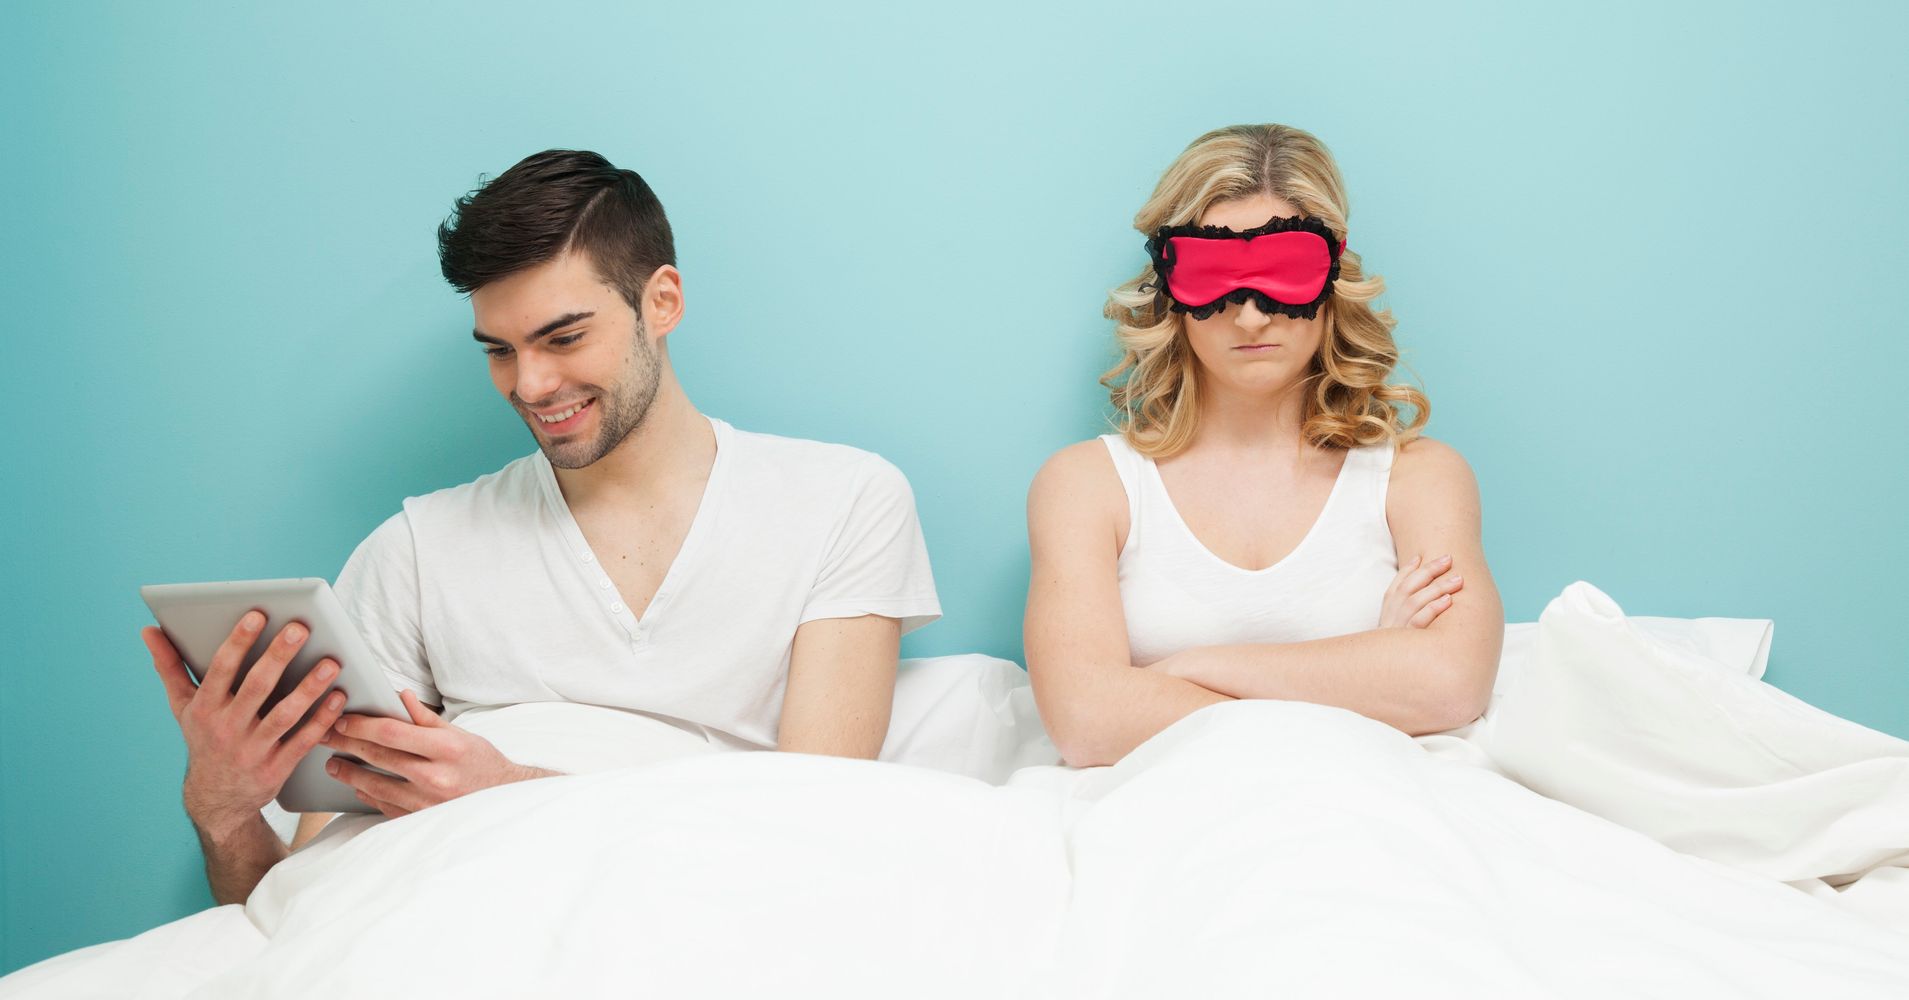 7 Bedroom Behaviors That Could Be Killing Your Marriage